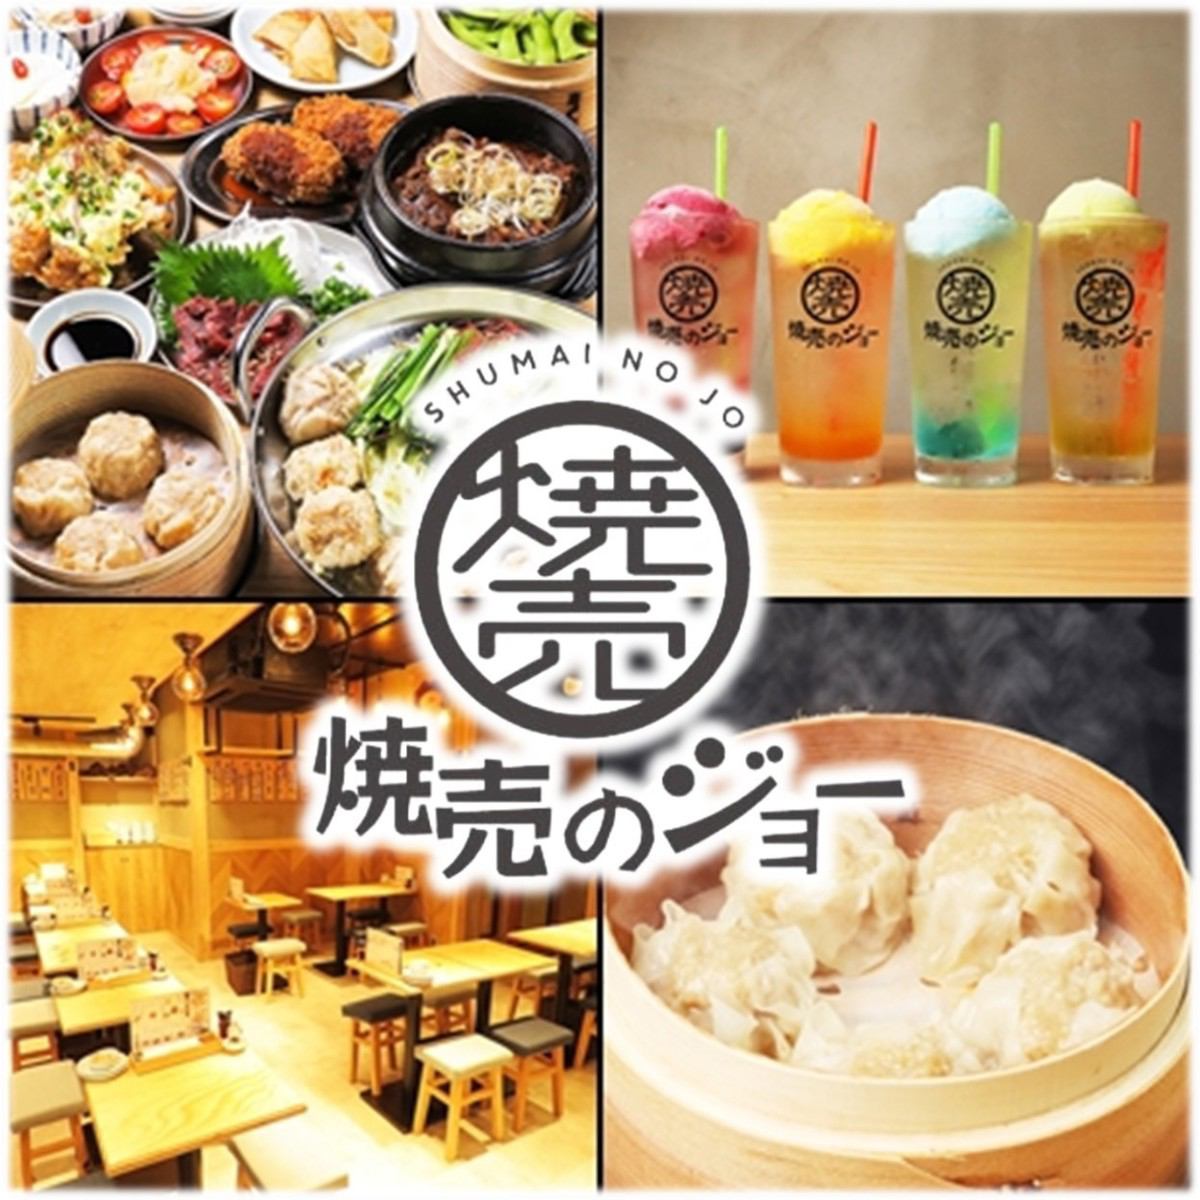 Great value for money! A popular bar that boasts shumai. 2 minutes walk from Machida Station.